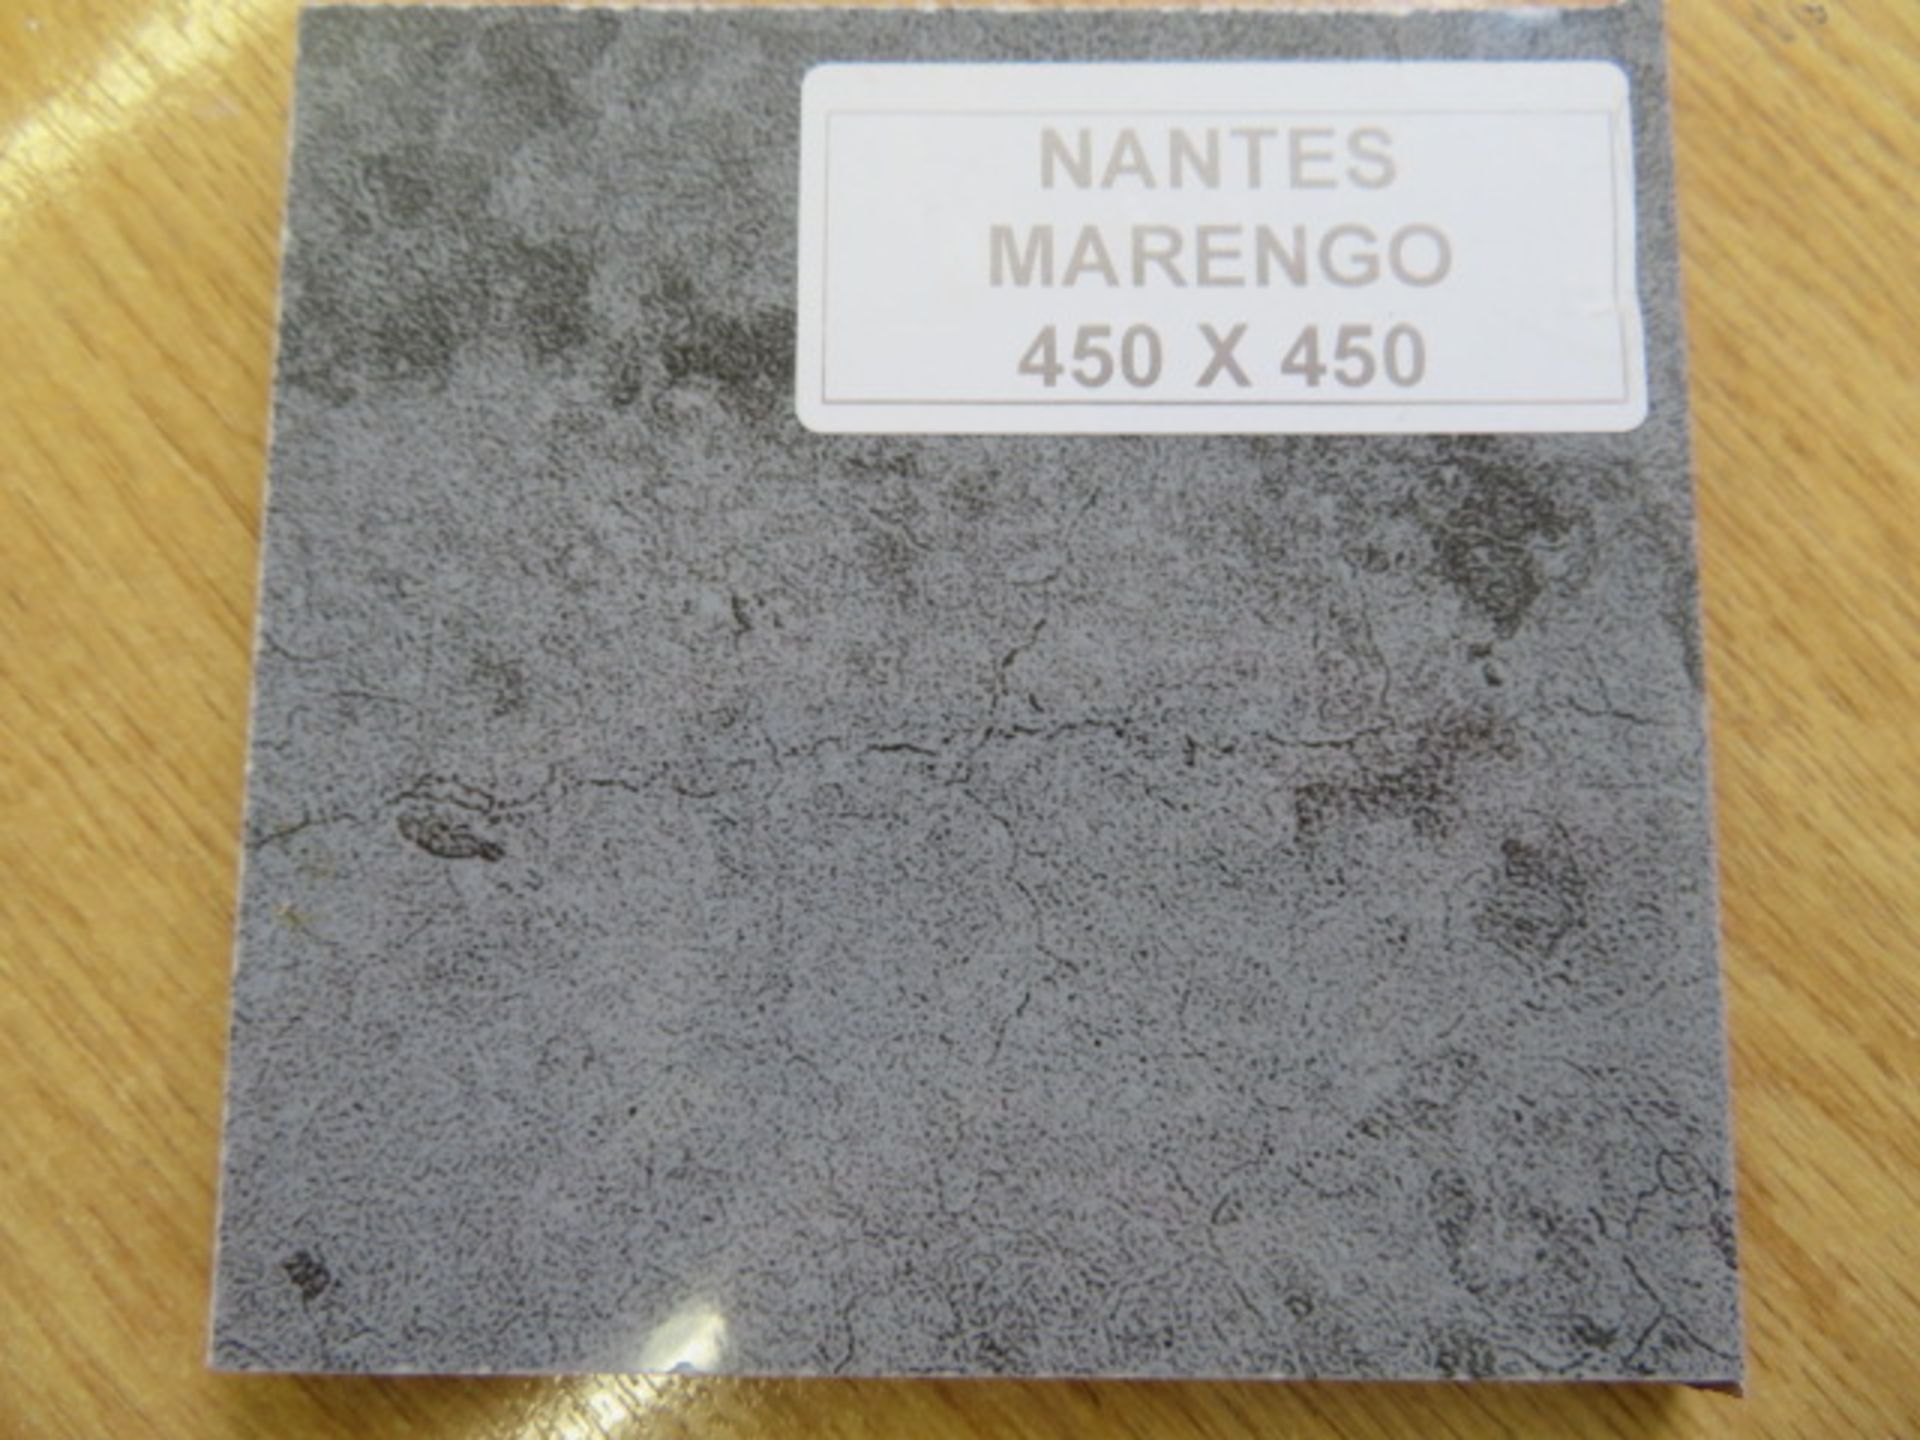 NEW 8.52 Square Meters of Nantes Marengo Wall and Floor Tiles. 450x450mm per tile, 8mm thick. ... - Image 2 of 3